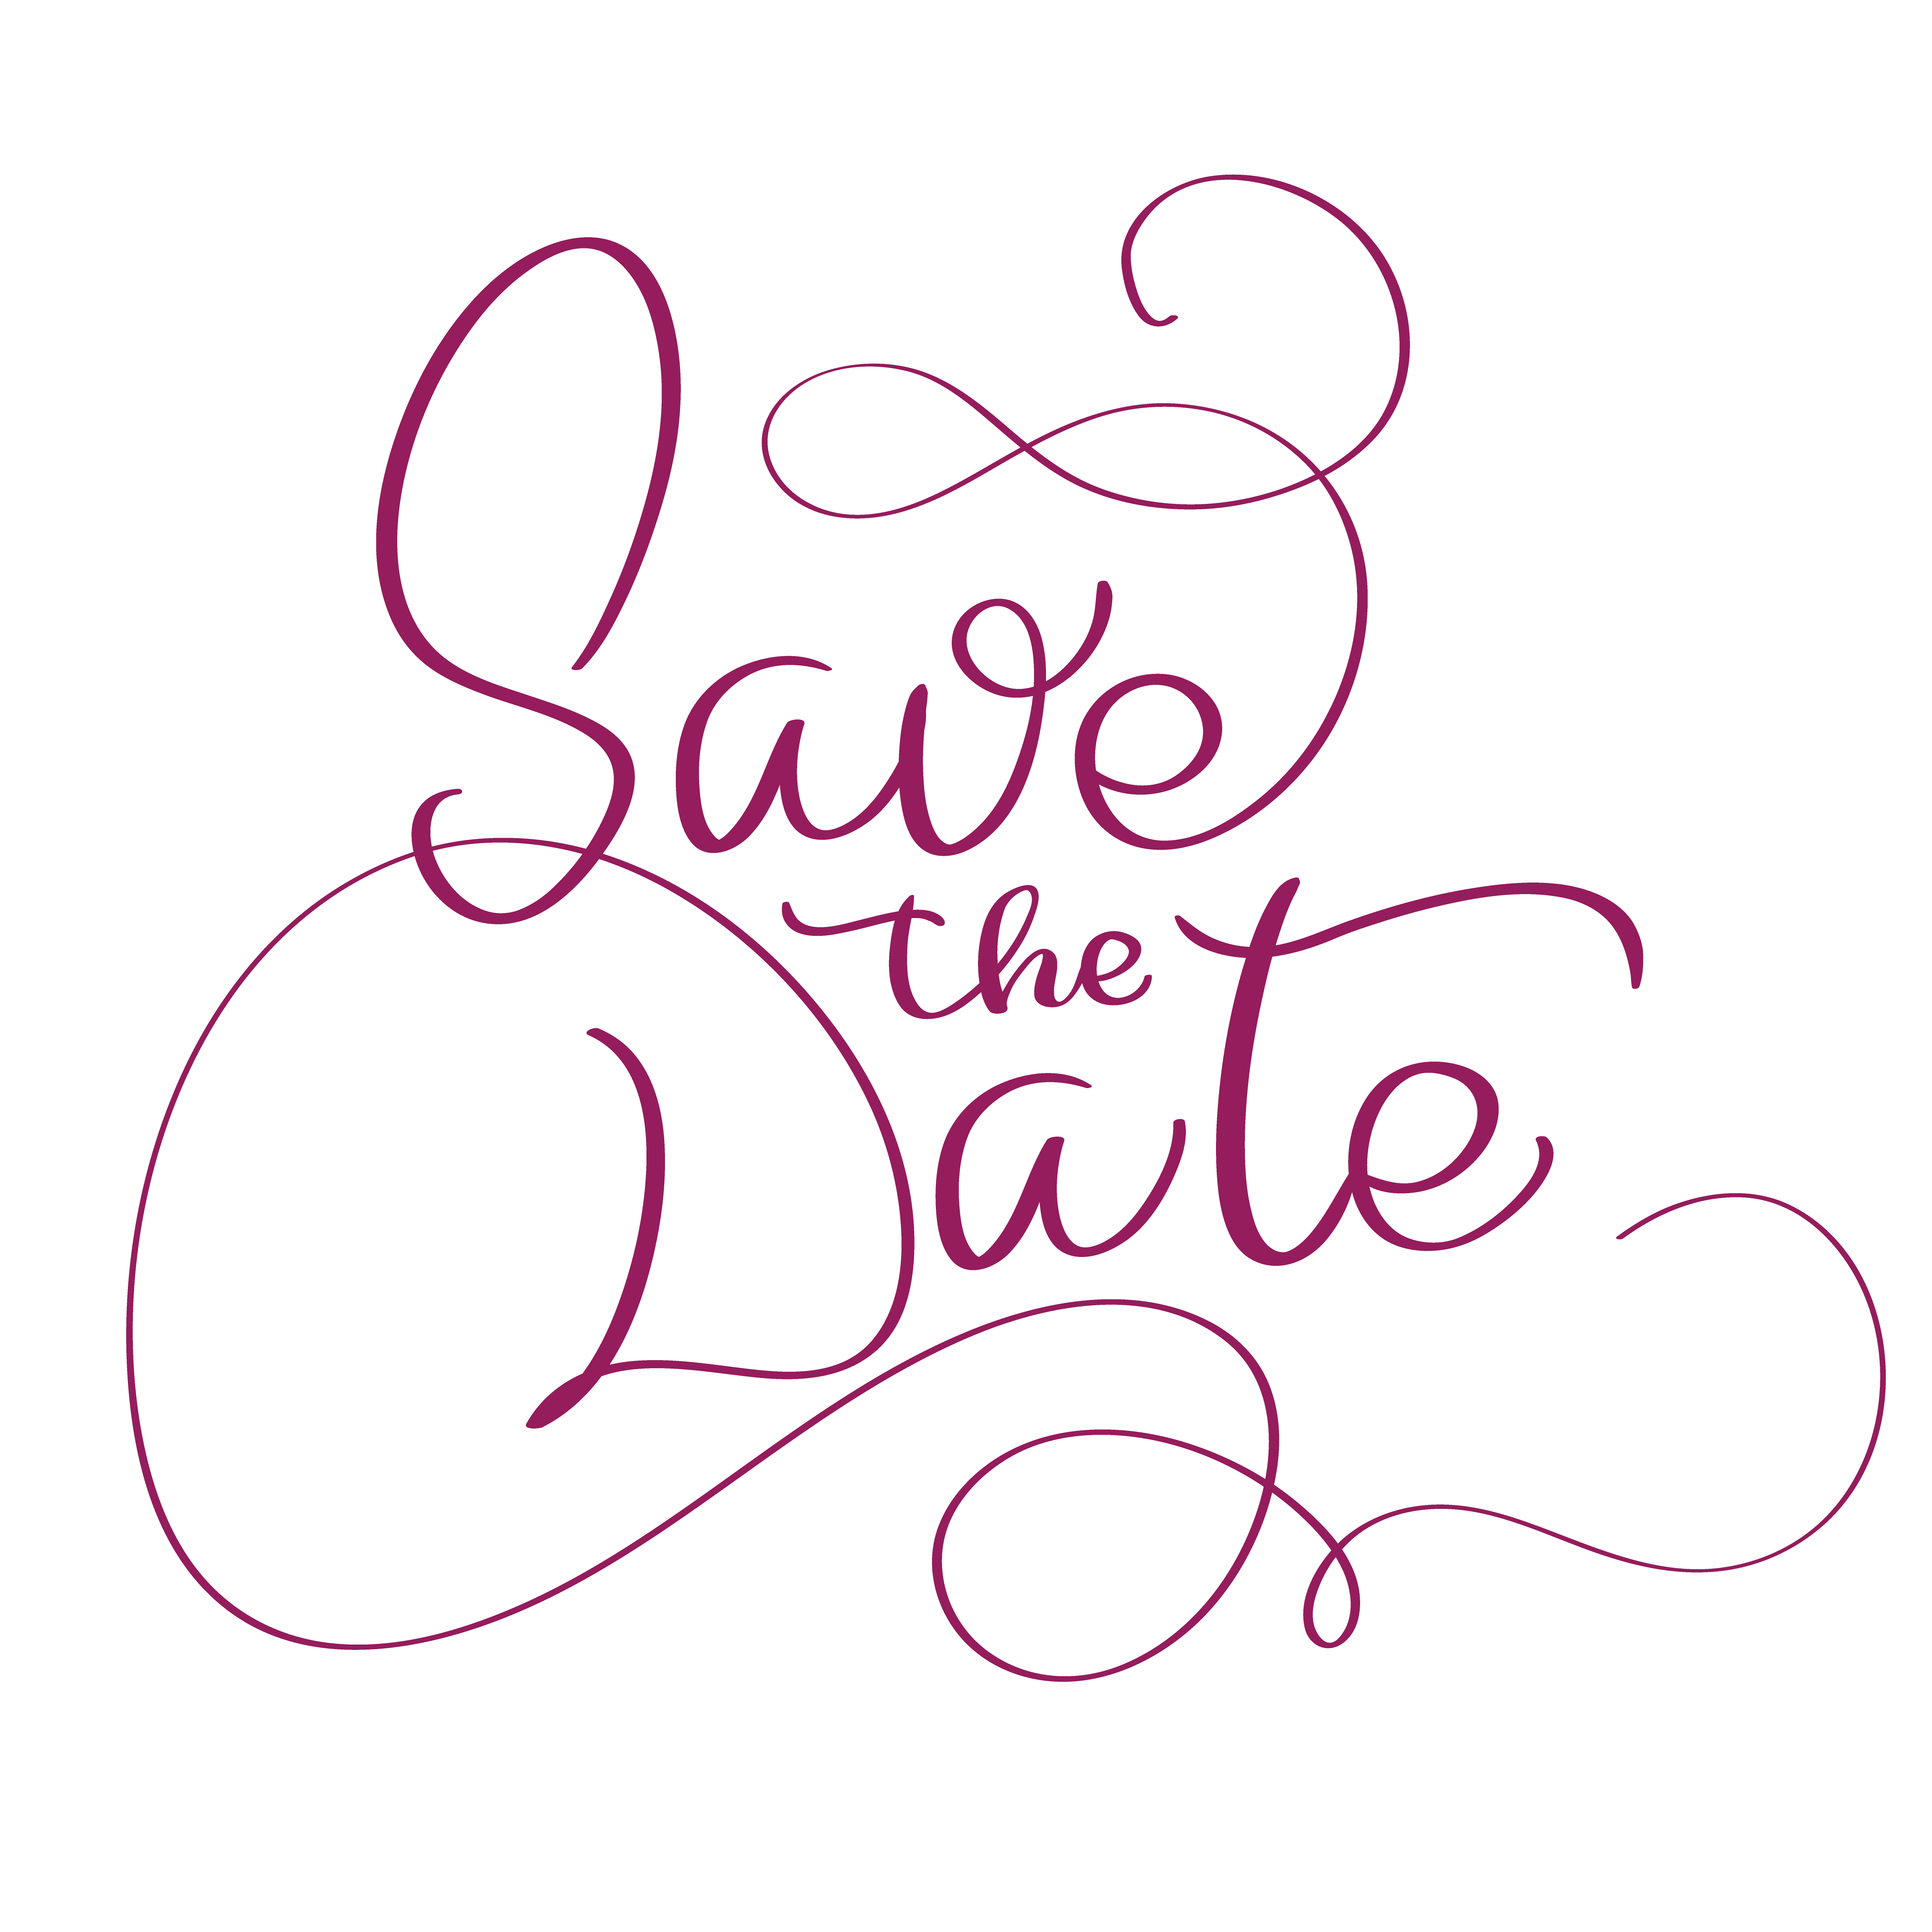 Save the date text on white background. Calligraphy lettering Vector